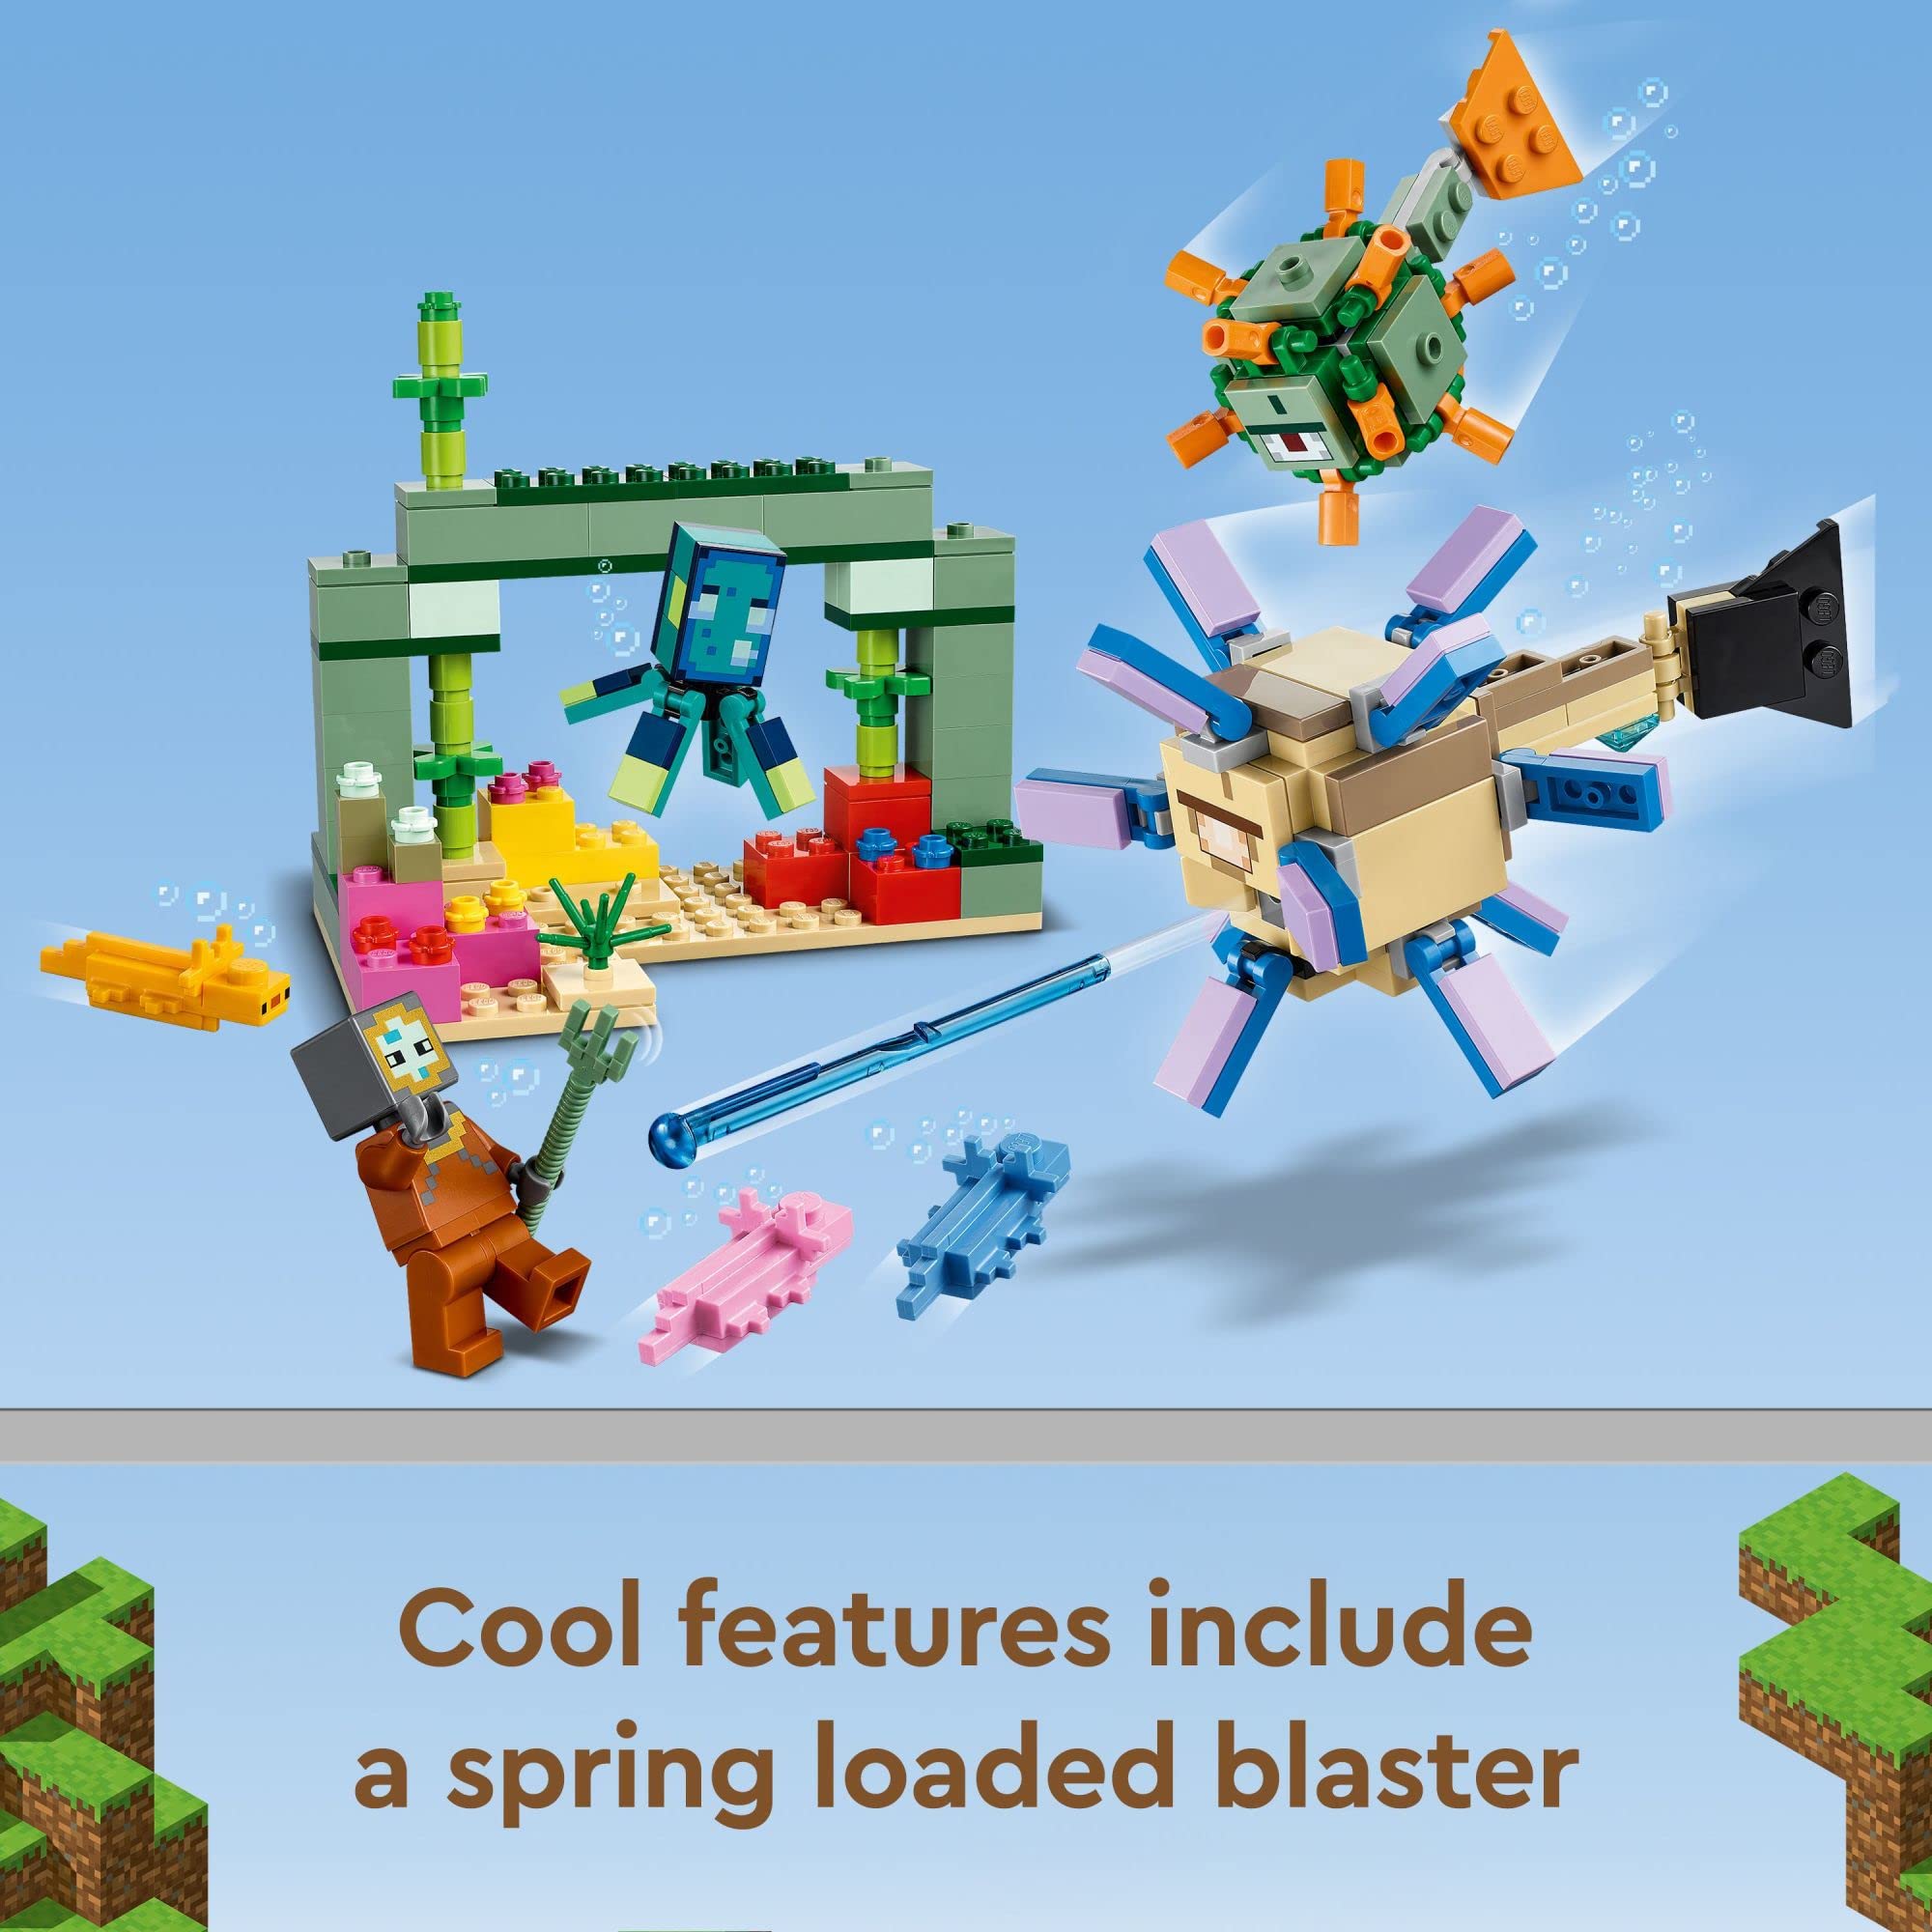 LEGO Minecraft The Guardian Battle Set, 21180 Coral Fish Toy, Gifts for Kids, Boys and Girls Age 8 Plus with Mobs Figures